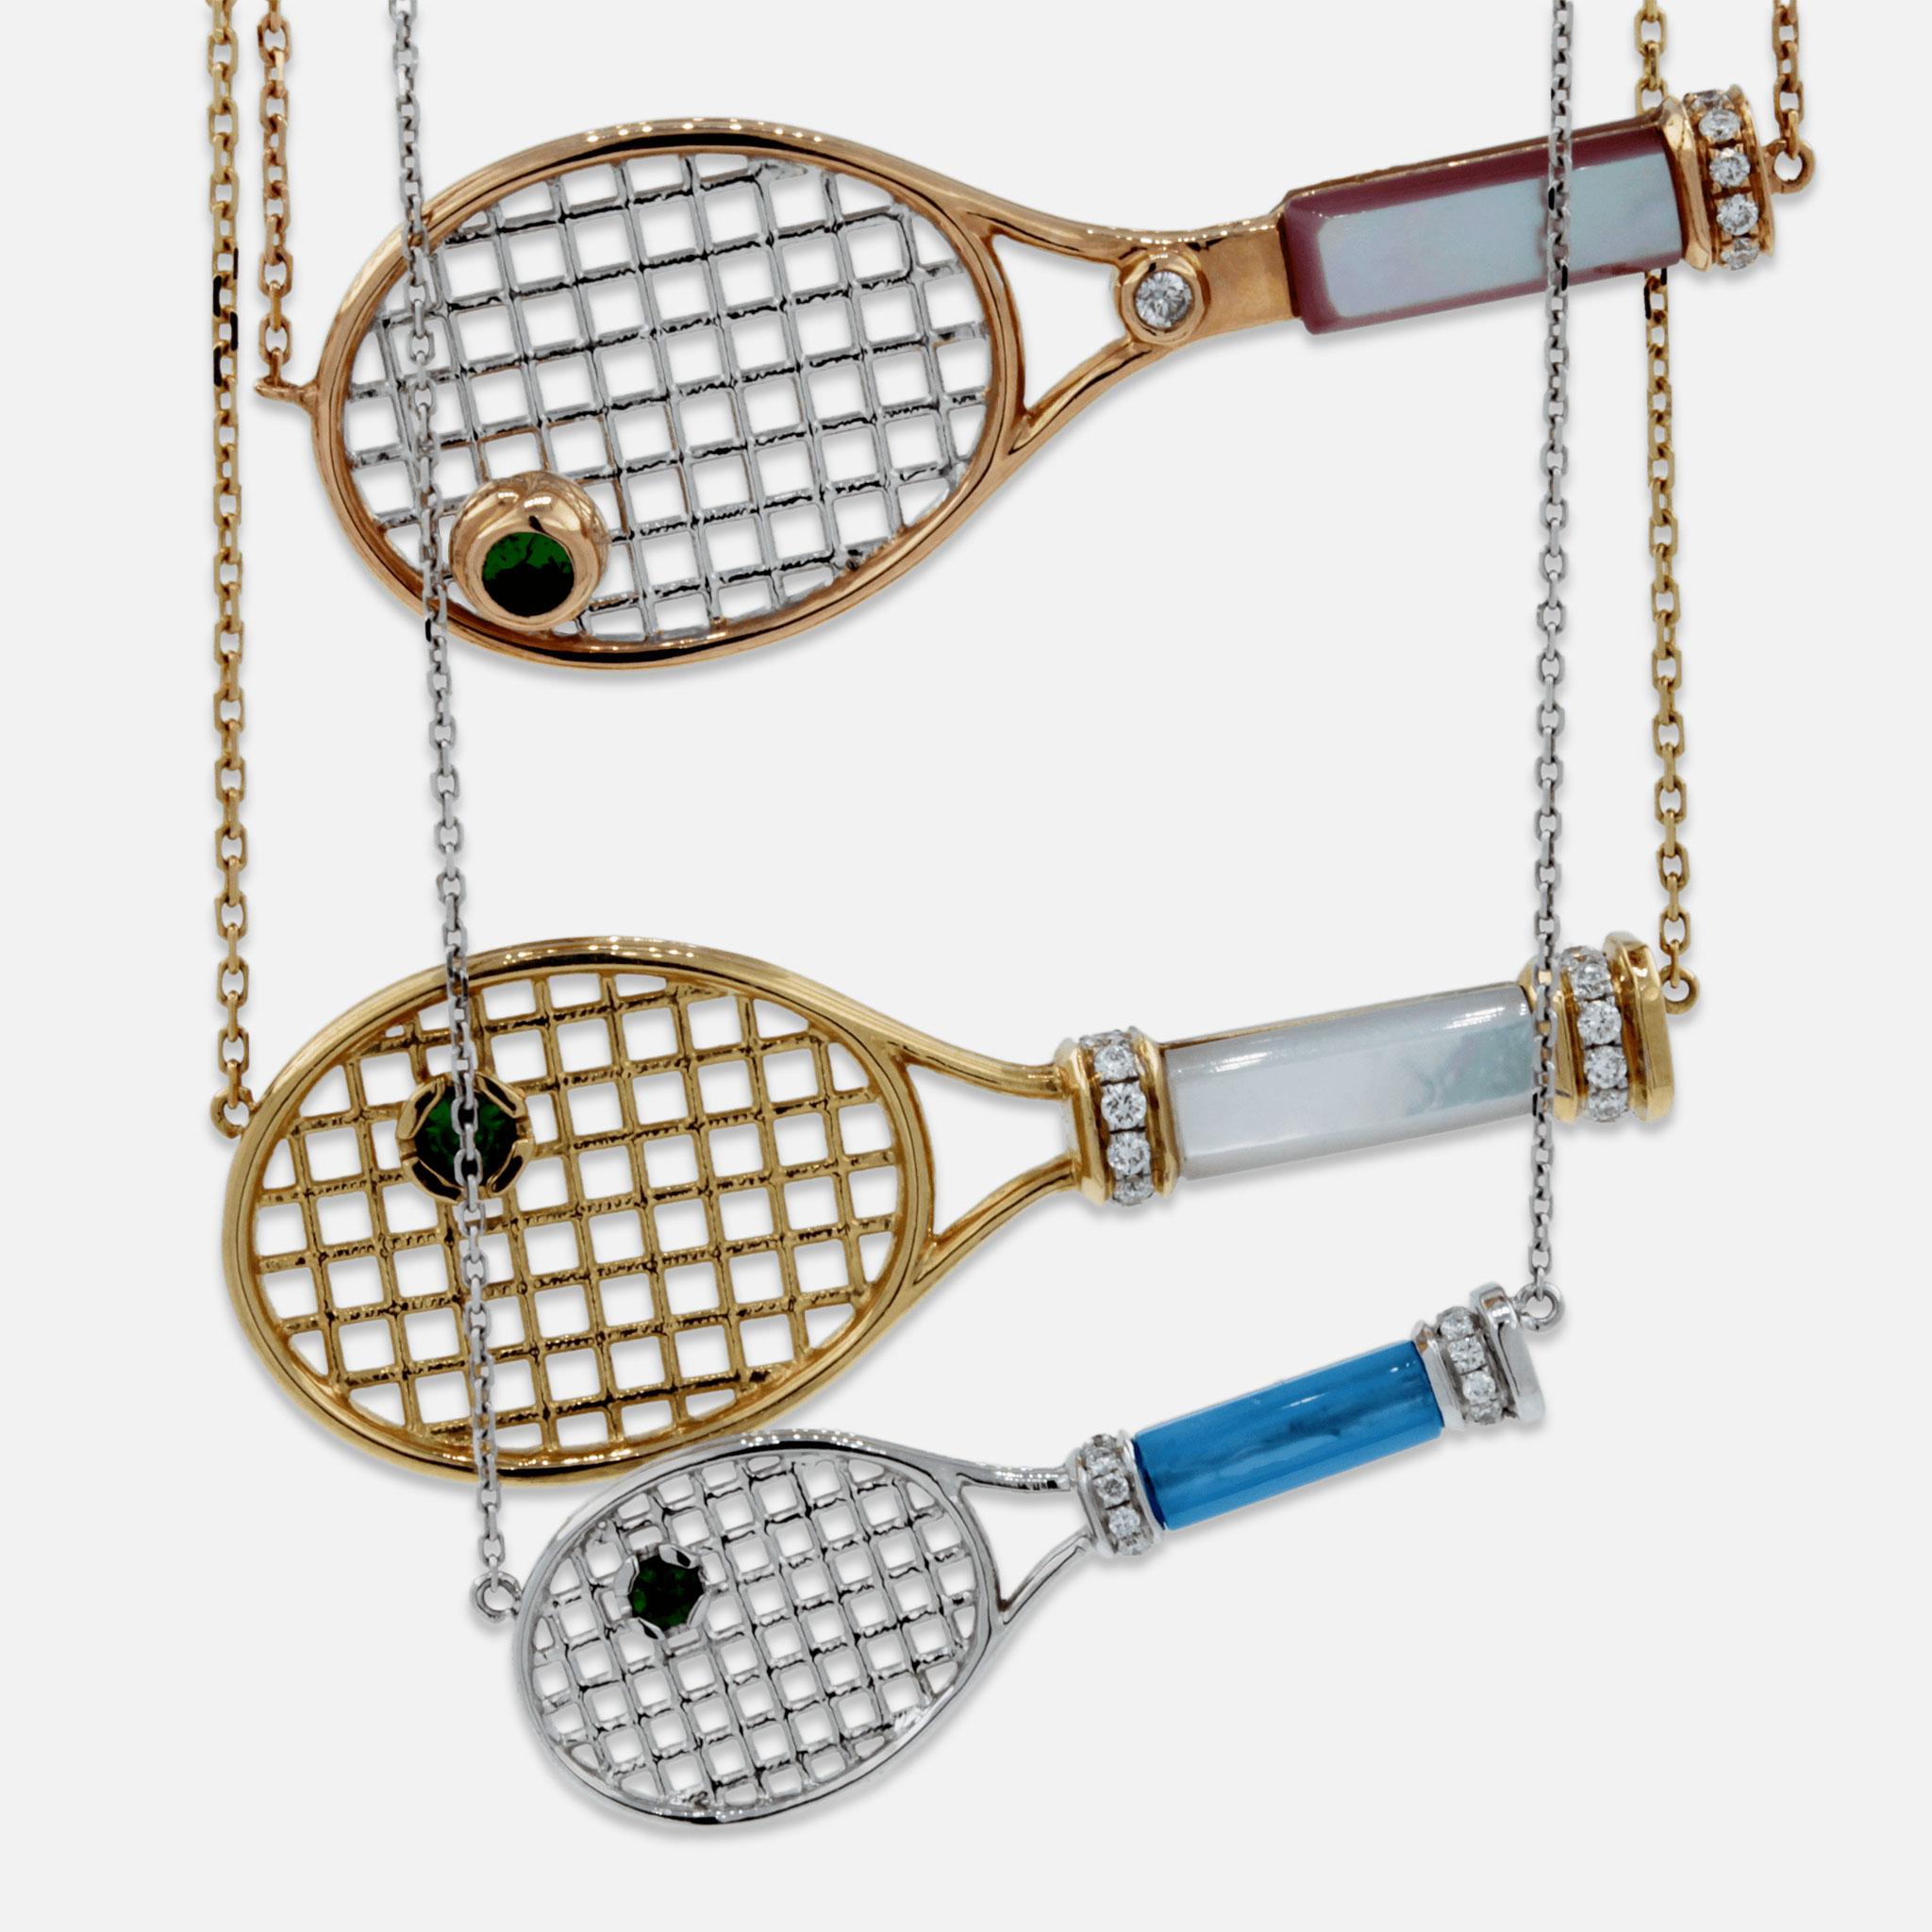 blue and white tennis racket